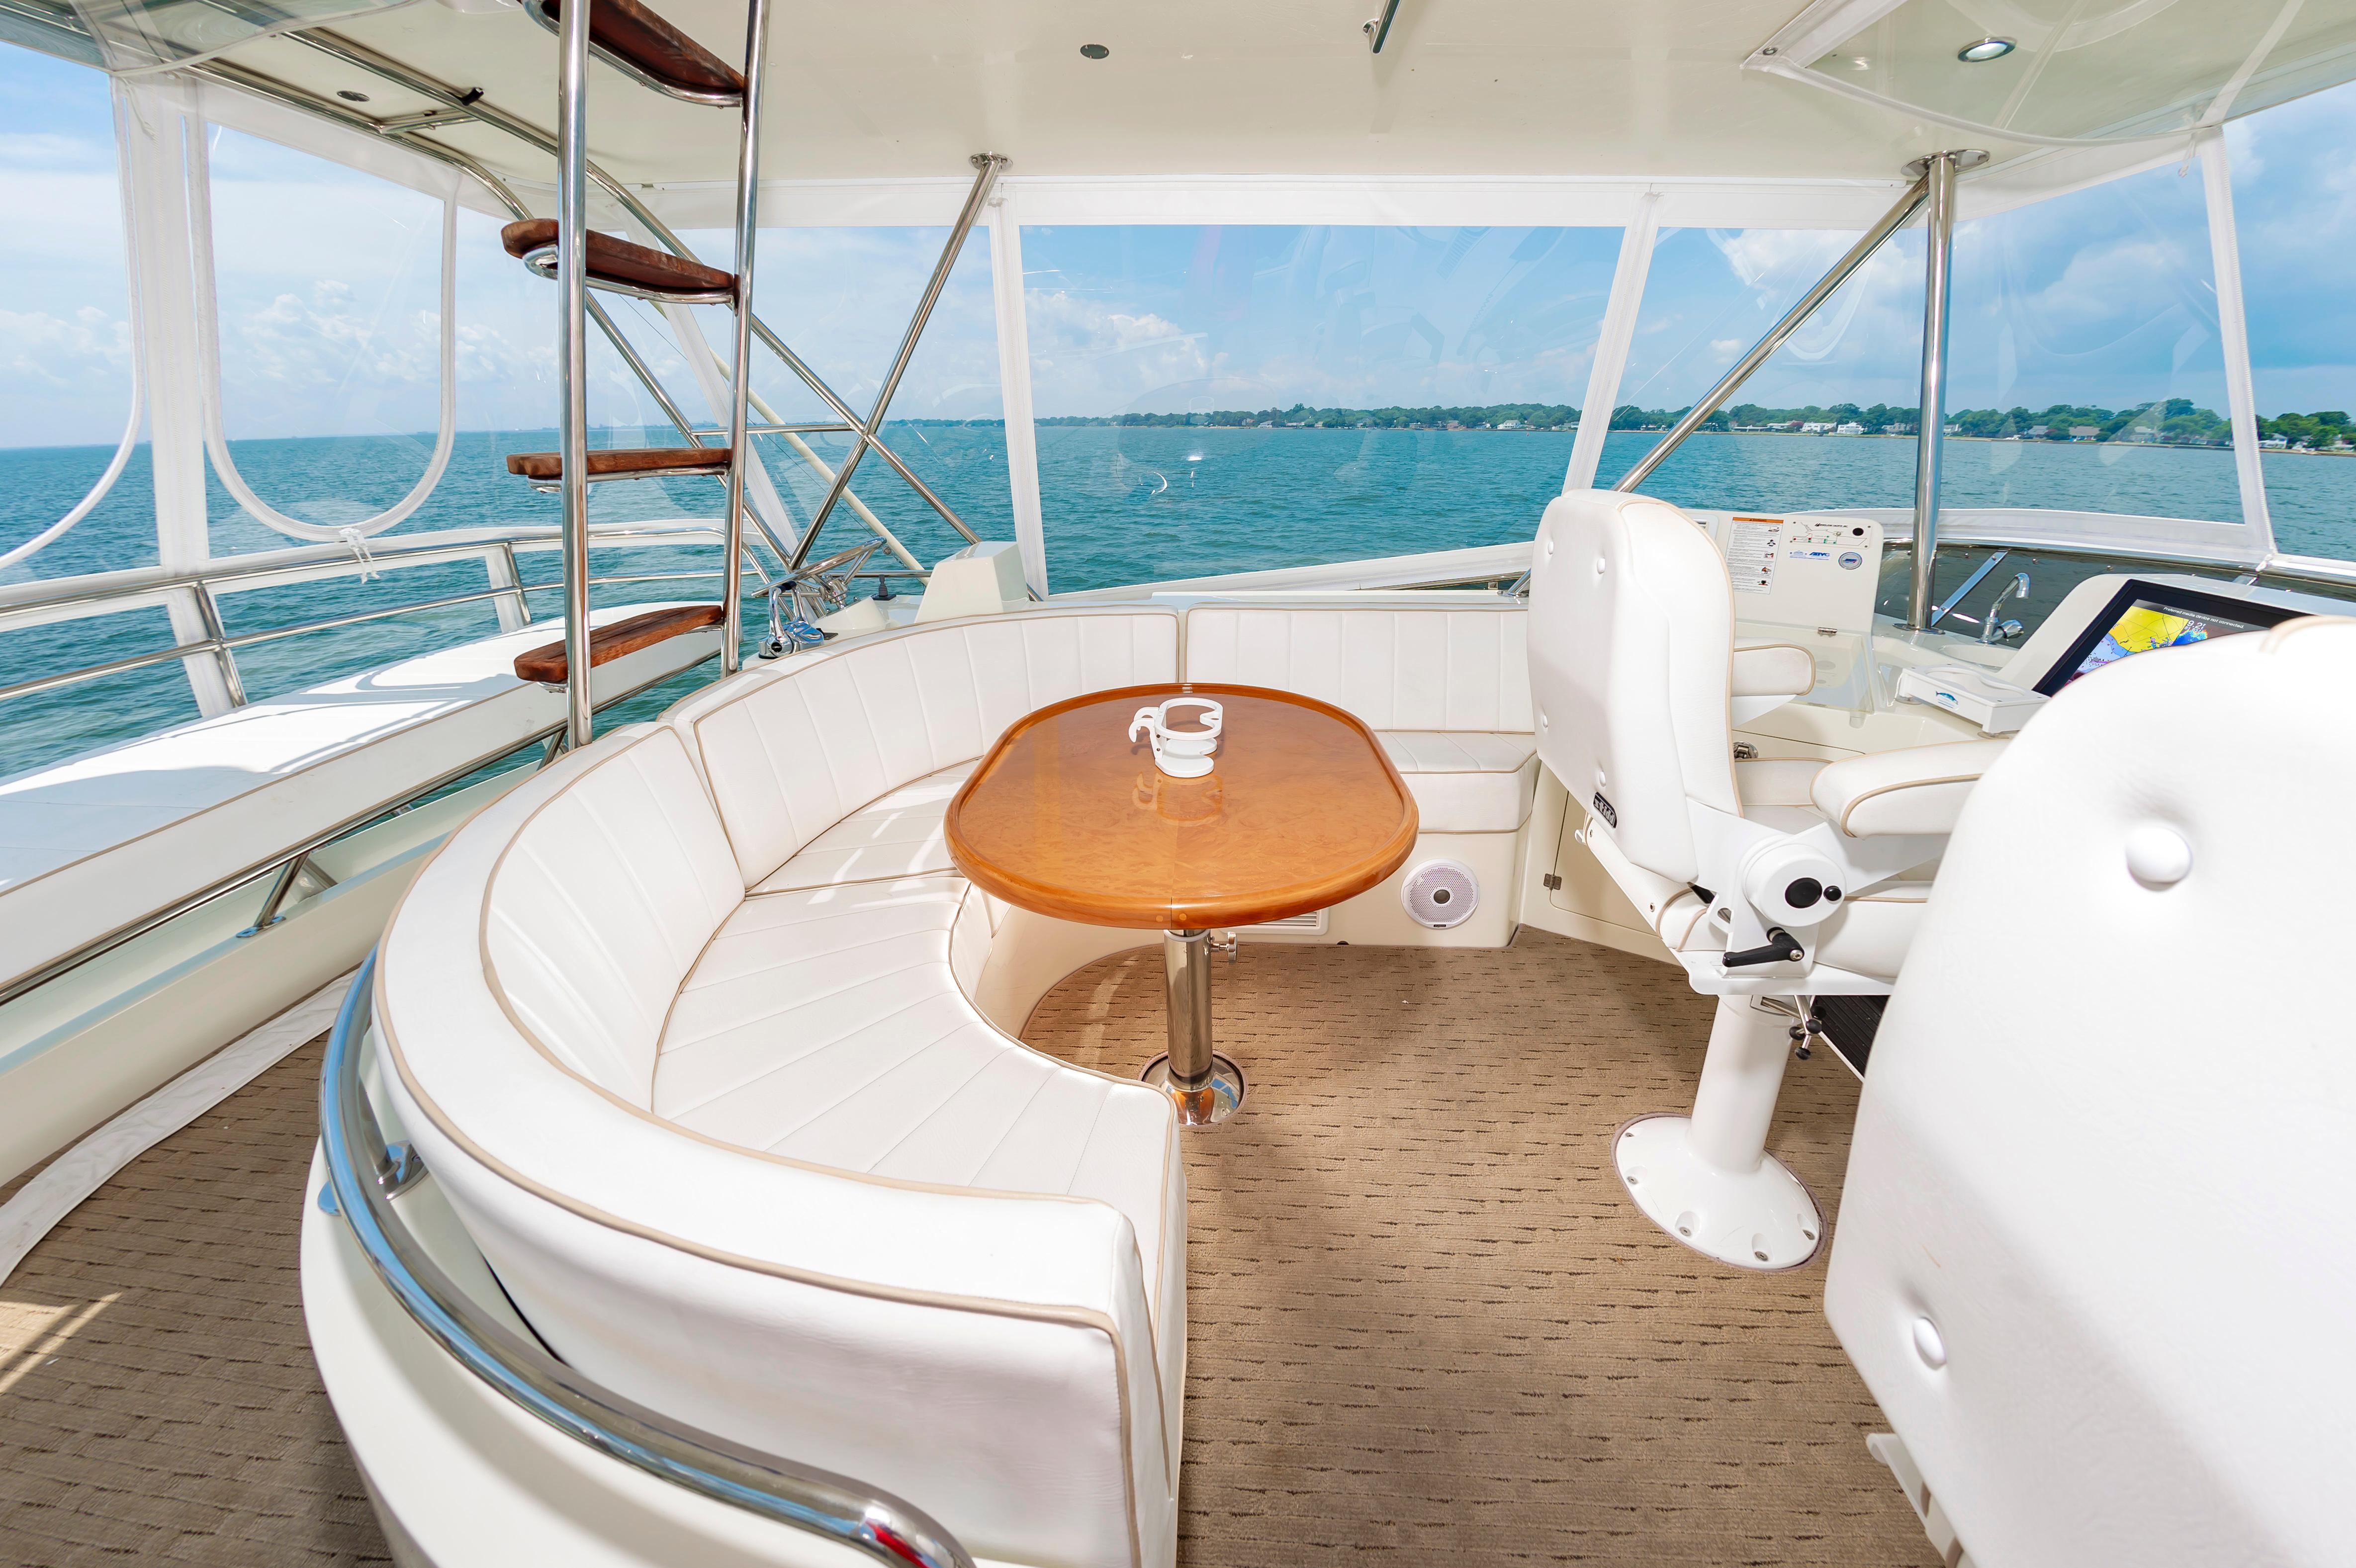 2016 Mikelson 50' S/F, flying bridge seating